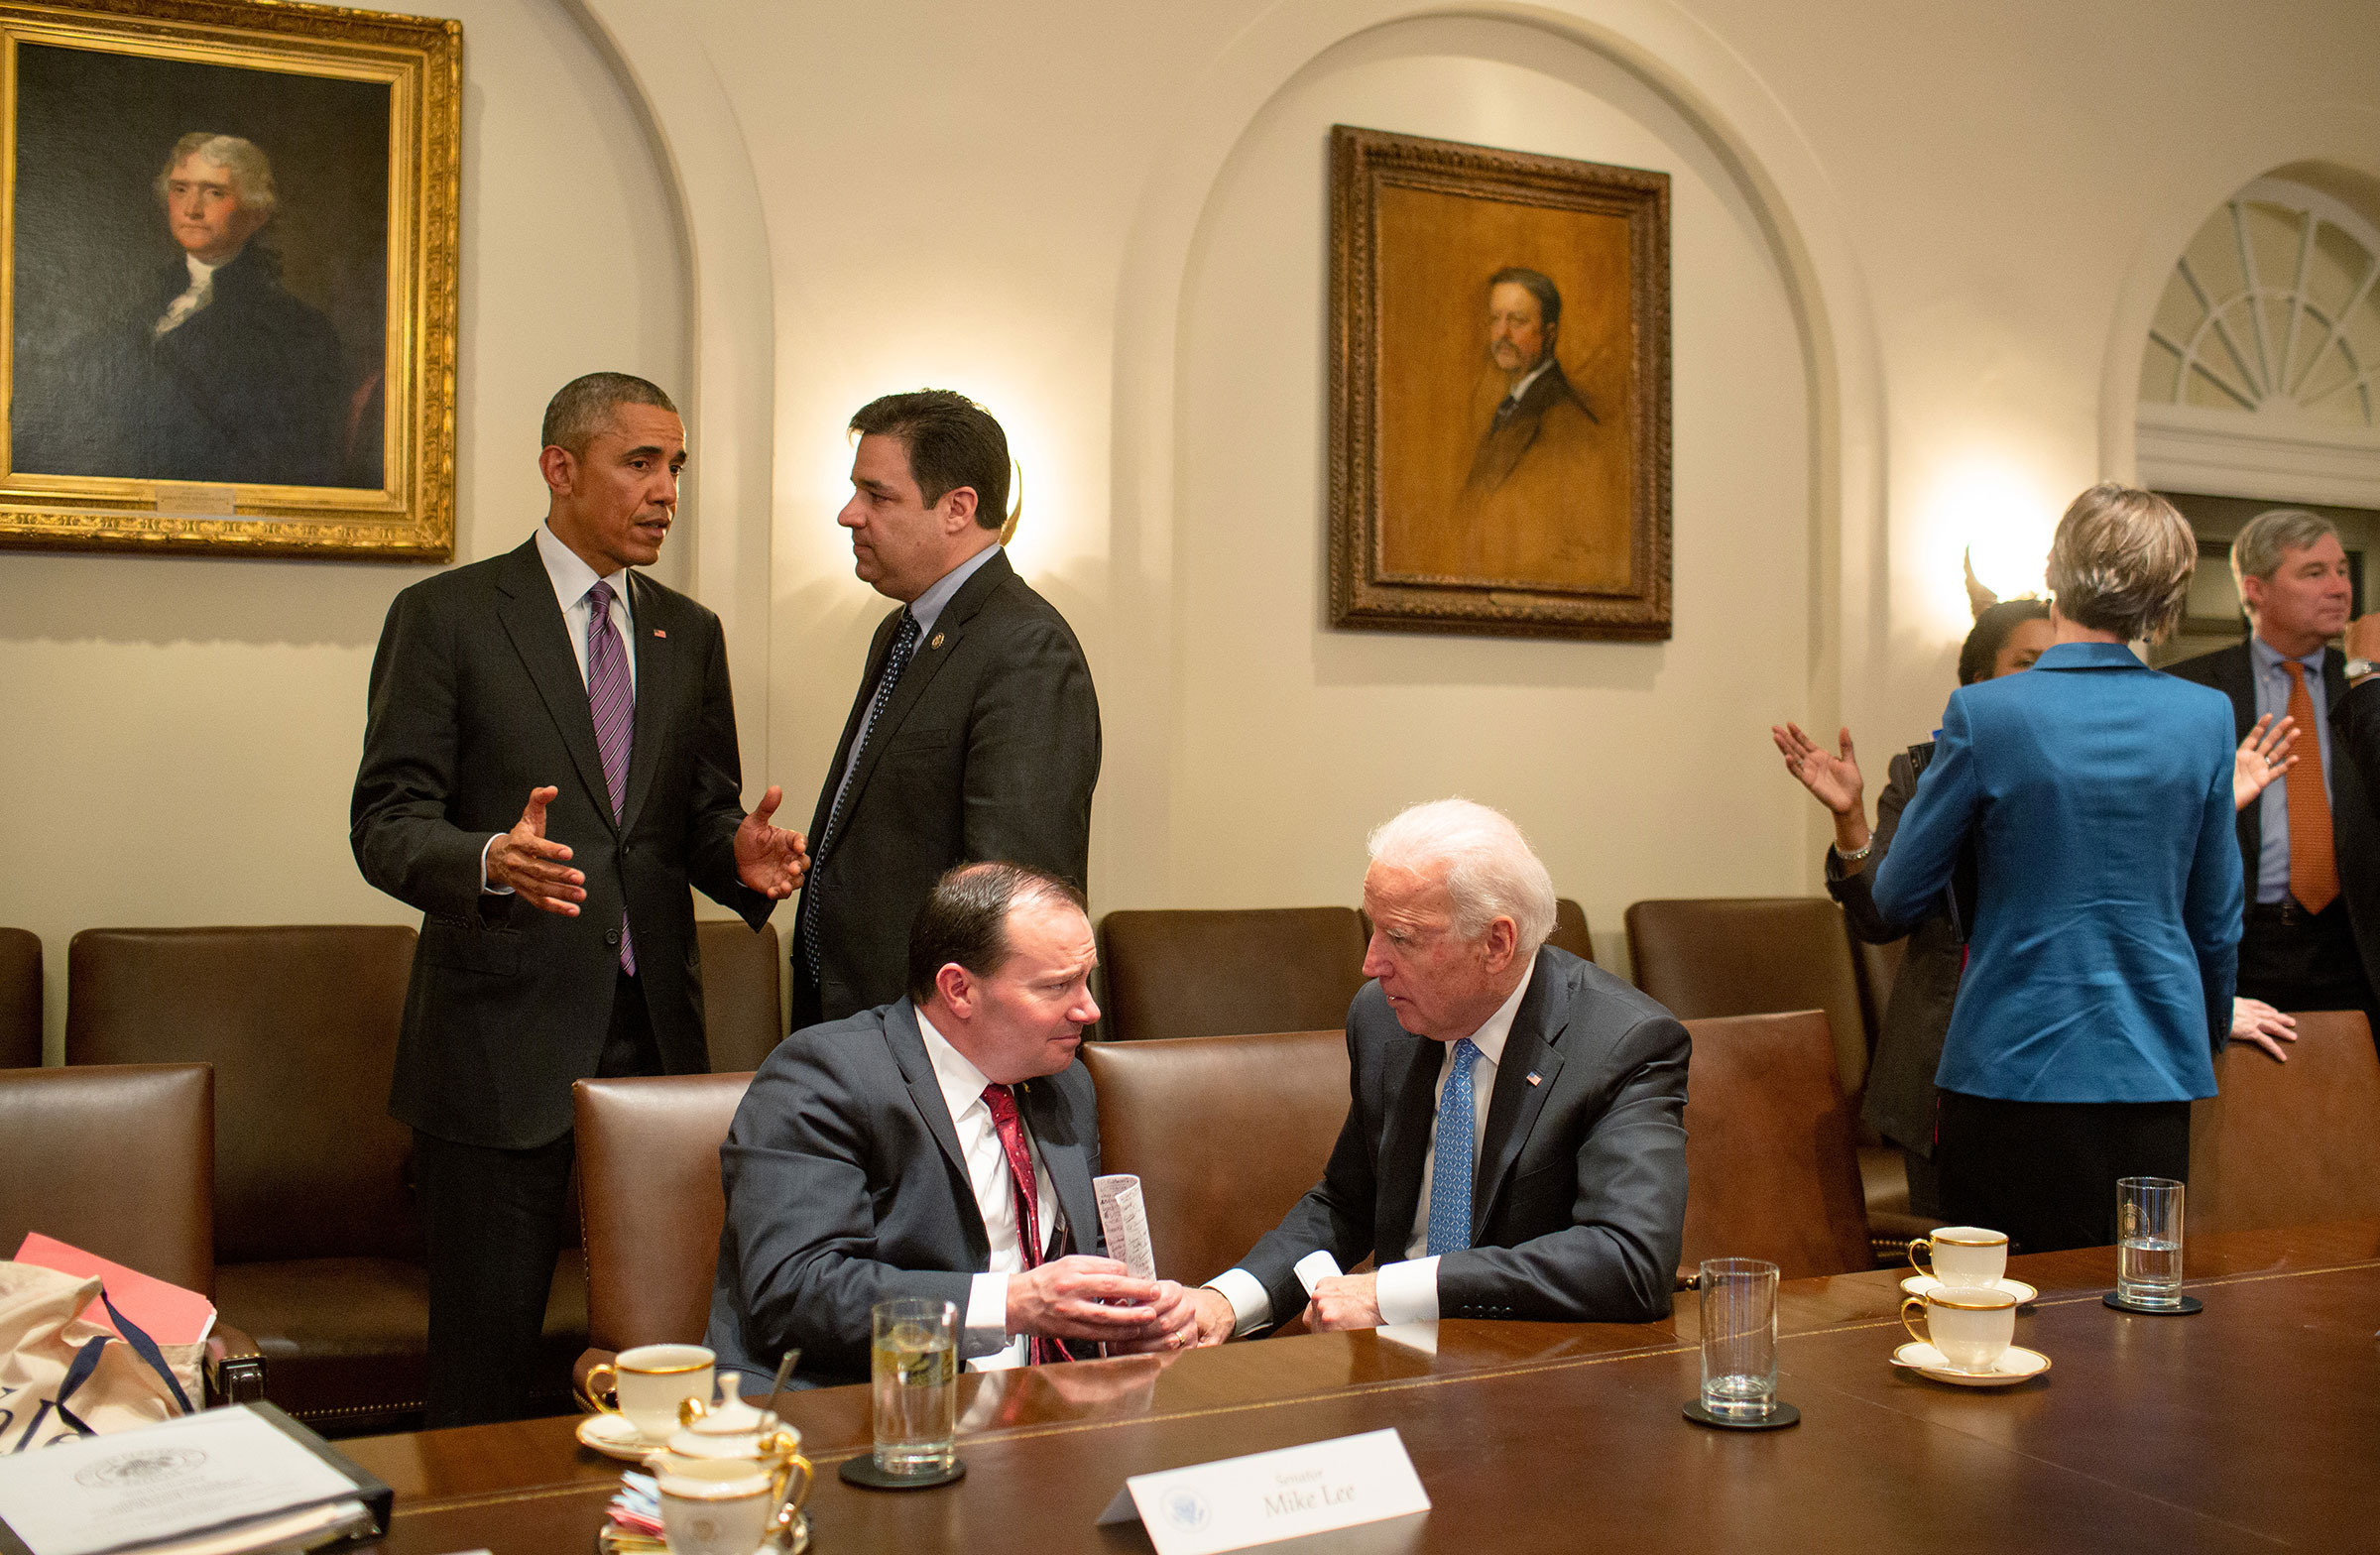 President Barack Obama talks with Rep. Rual Labrador as Vice President Joe Biden talks with Sen. Mike Lee following a meeting with bipartisan Members of Congress to discuss criminal justice reform, in the Cabinet Room of the White House, on Feb. 24, 2015. (Official White House Photo by Pete Souza)